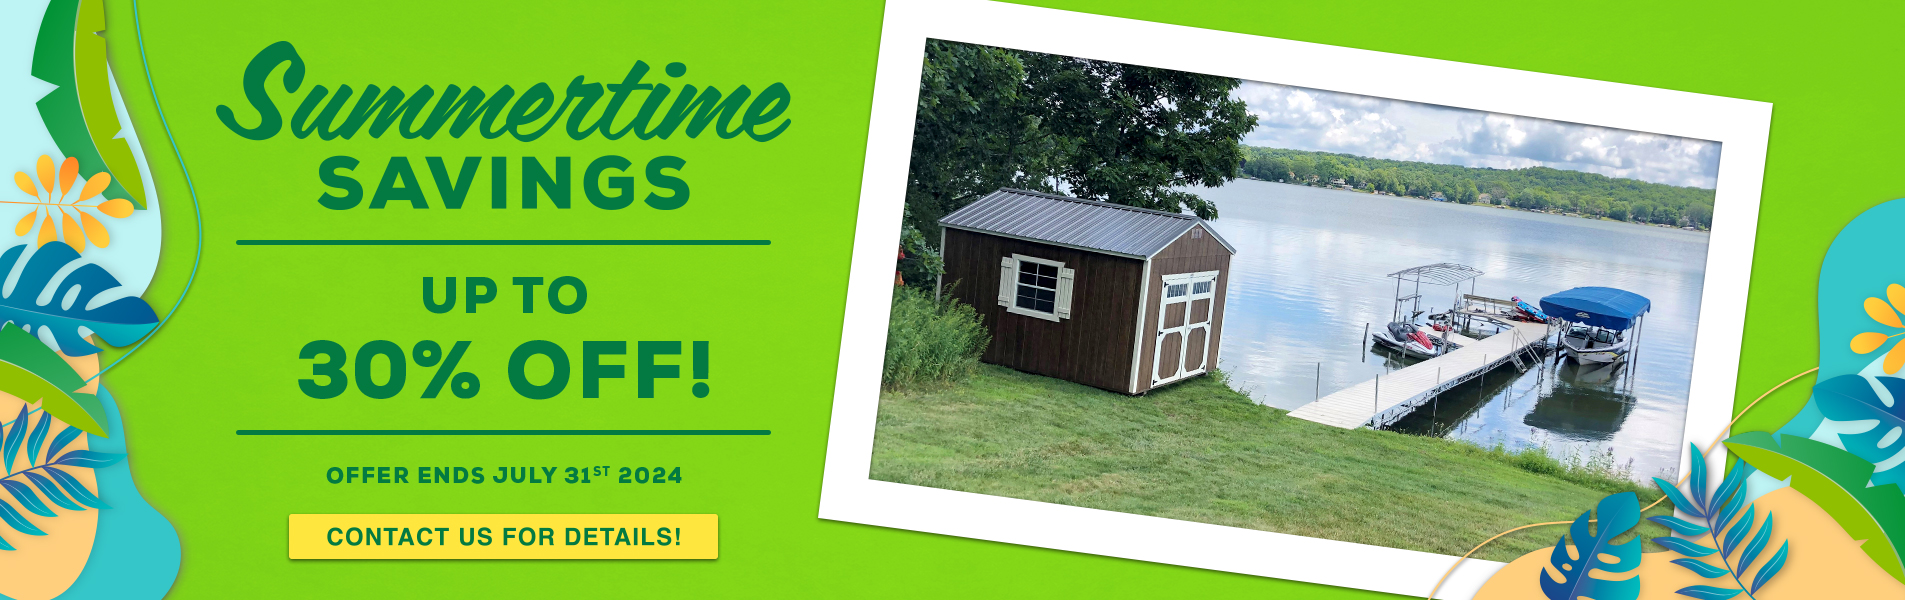 July Summertime Savings Sales Event for shed sales at French Creek Shed Sales and custom order sheds in Casper, WY Sheds from 15%, 25%, to 30% OFF